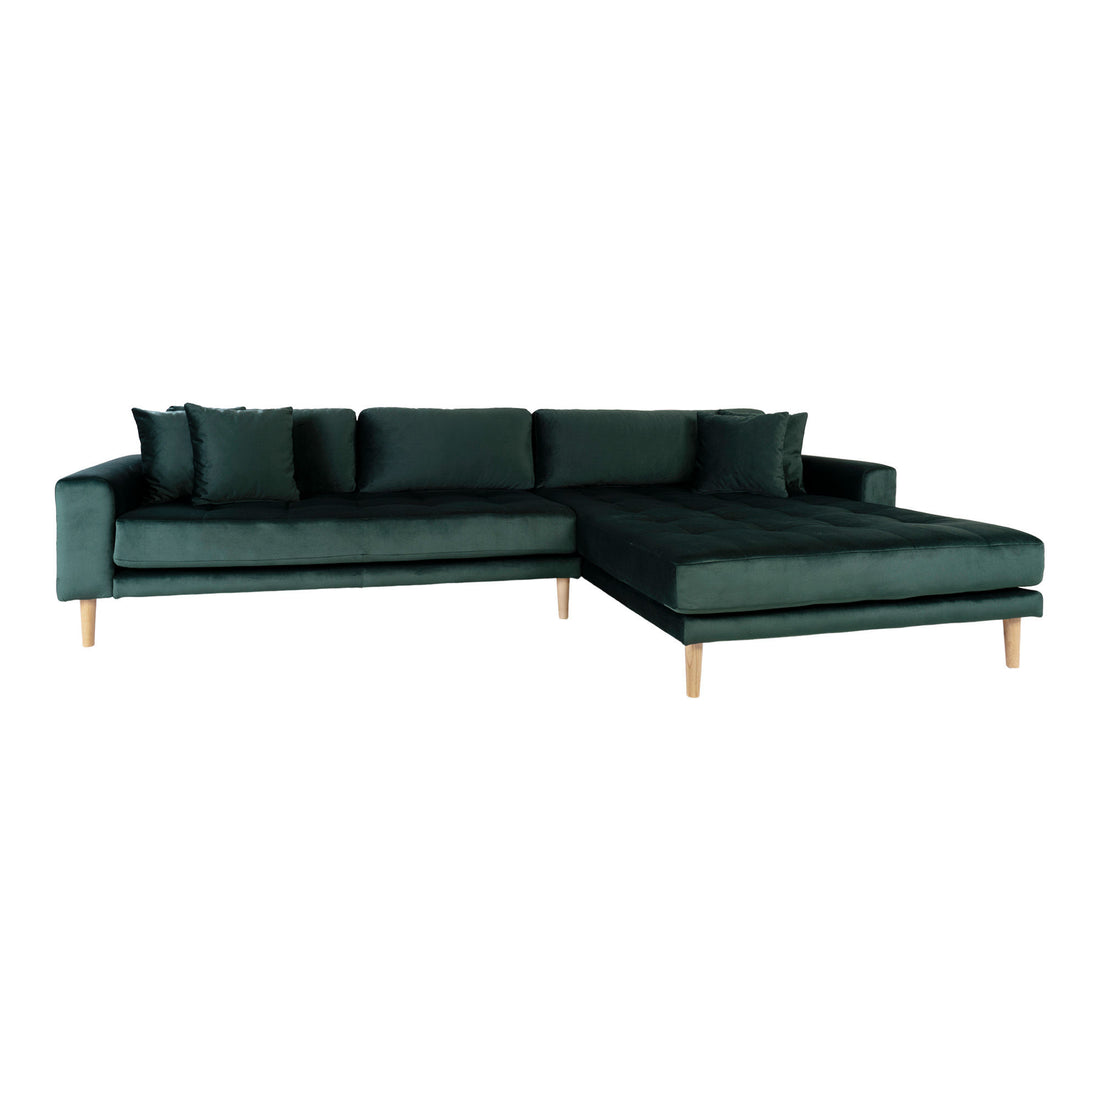 Lido Lounge Sofa - Lounge Sofa, right -wing Velor, Dark Green with Four Pillows and Nature Wooden Ben, HN1006 - 1 - Pcs